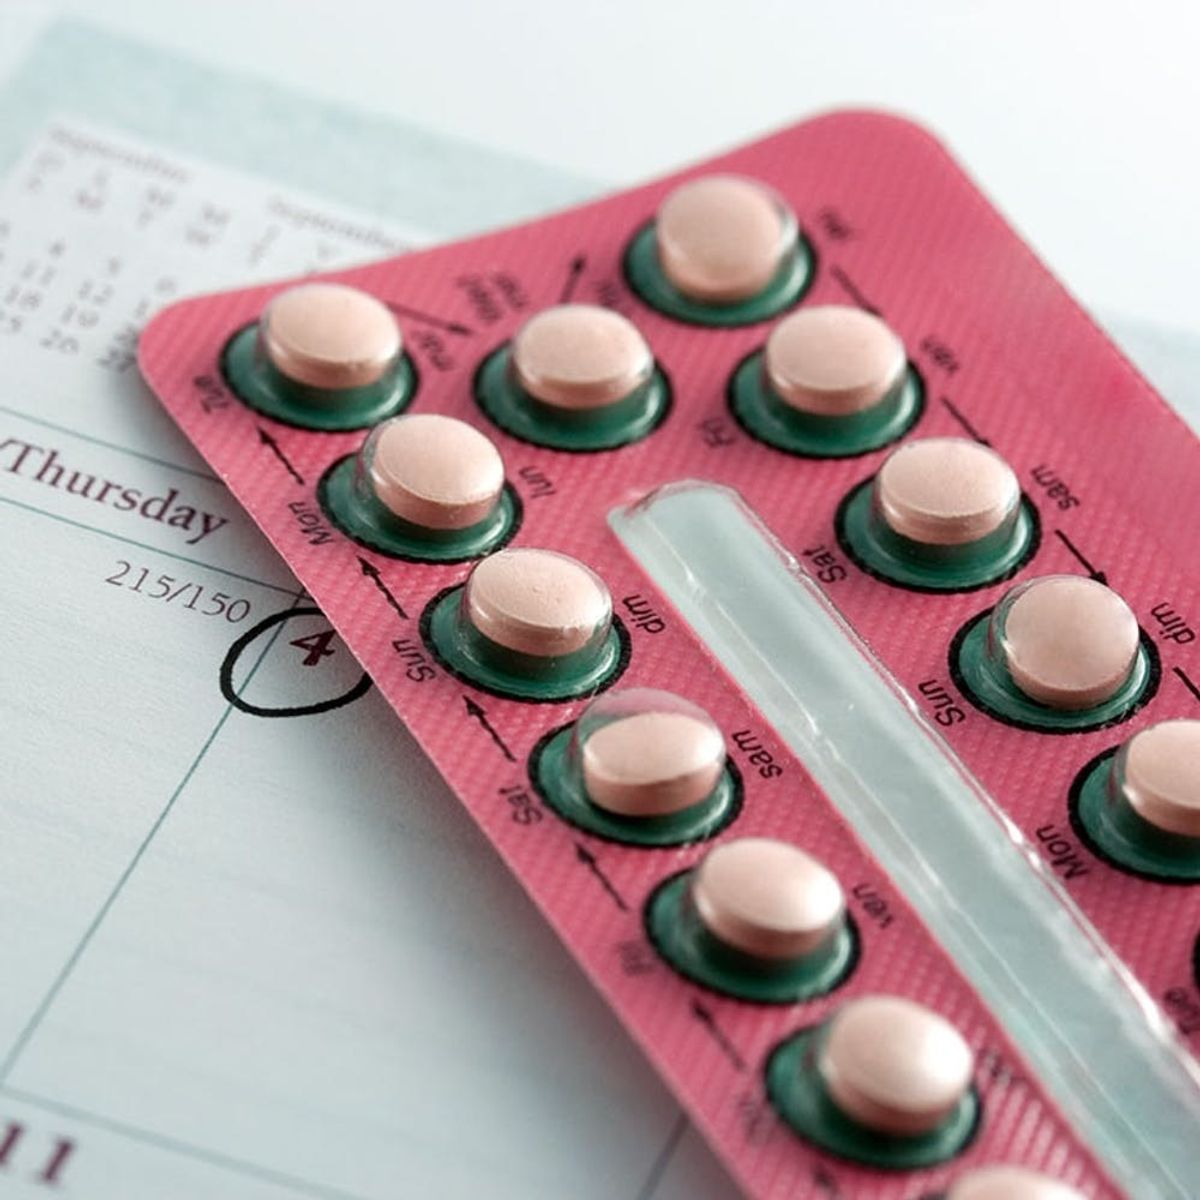 Here’s Where You Can Now Get a Birth Control Prescription Without Visiting a Doctor